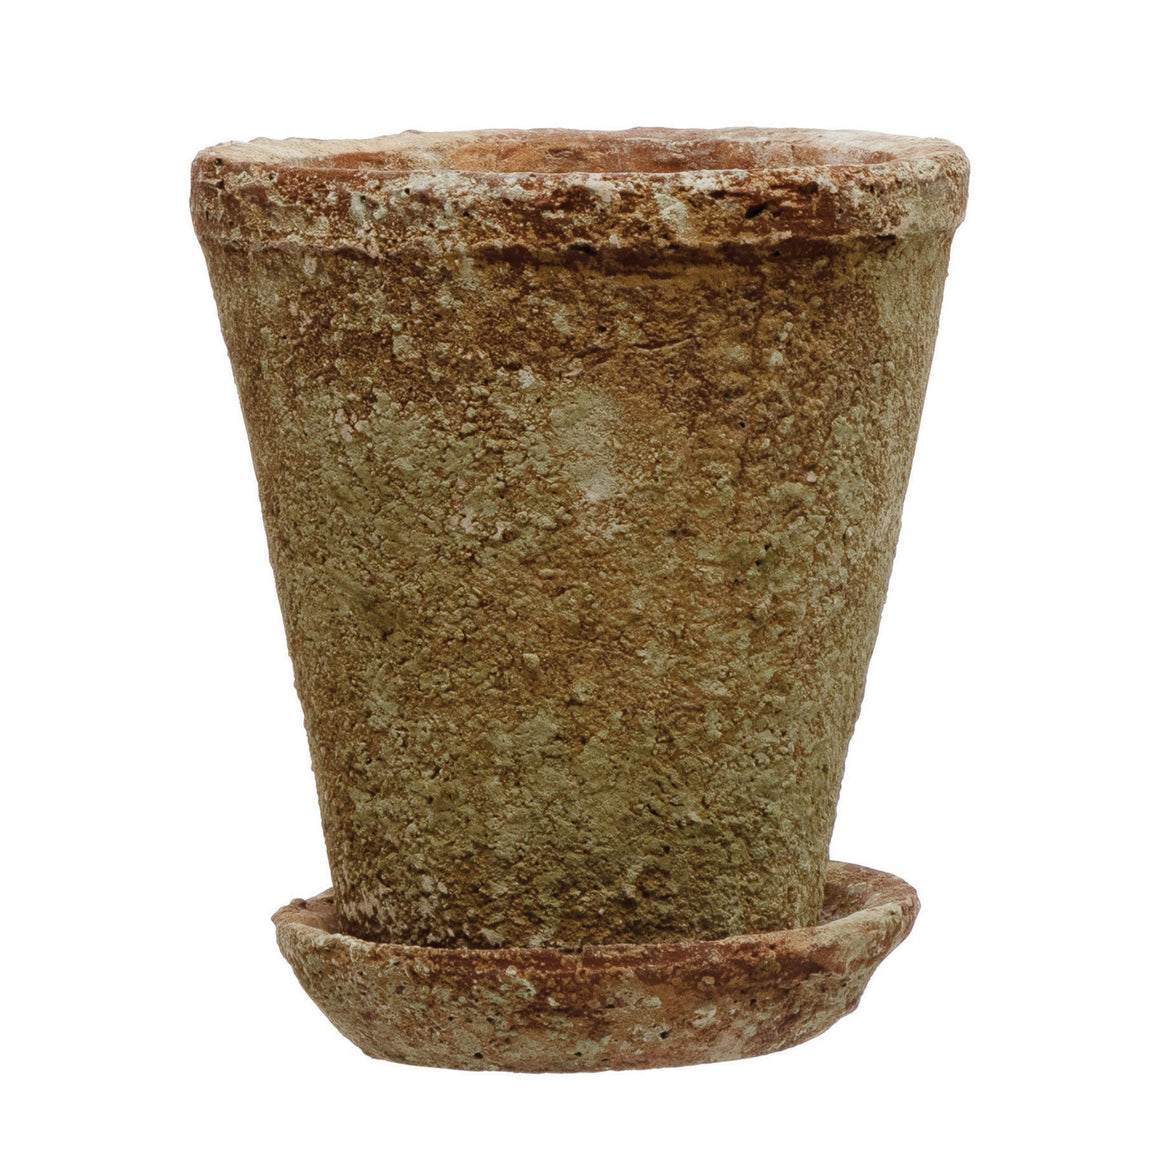 Distressed Terracotta Finished Cement Planter w/Saucer